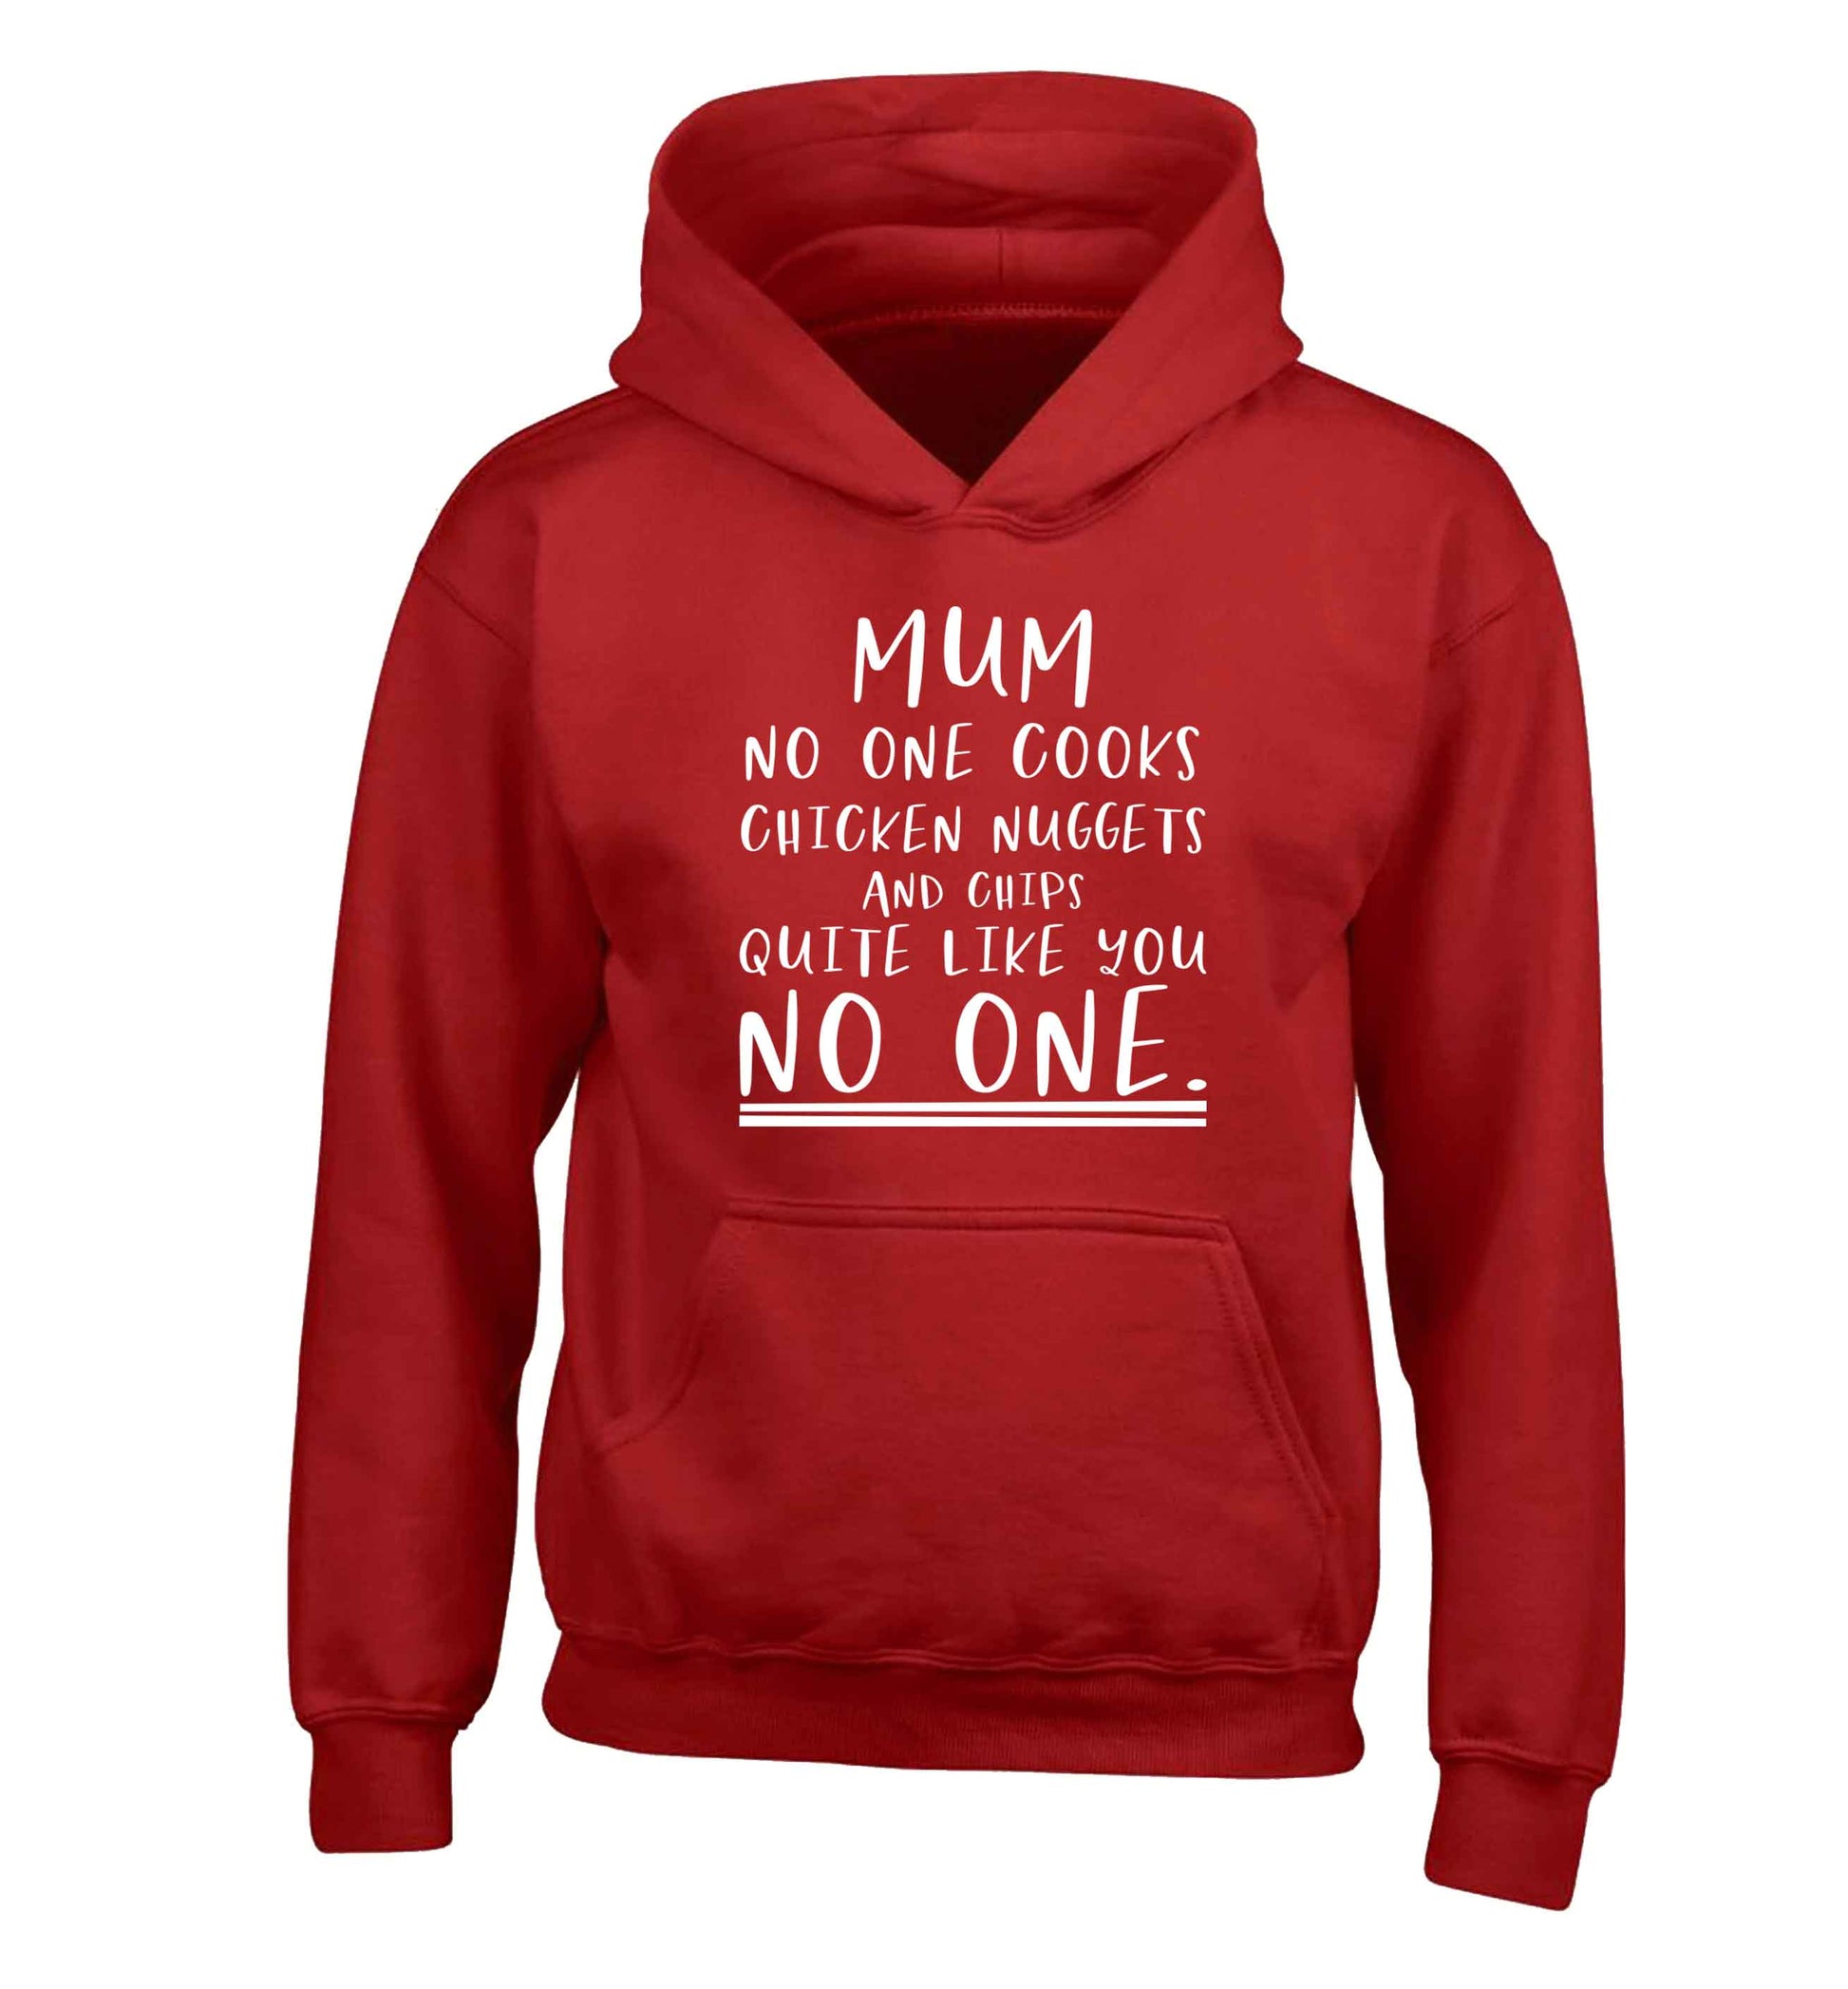 Super funny sassy gift for mother's day or birthday!  Mum no one cooks chicken nuggets and chips like you no one children's red hoodie 12-13 Years